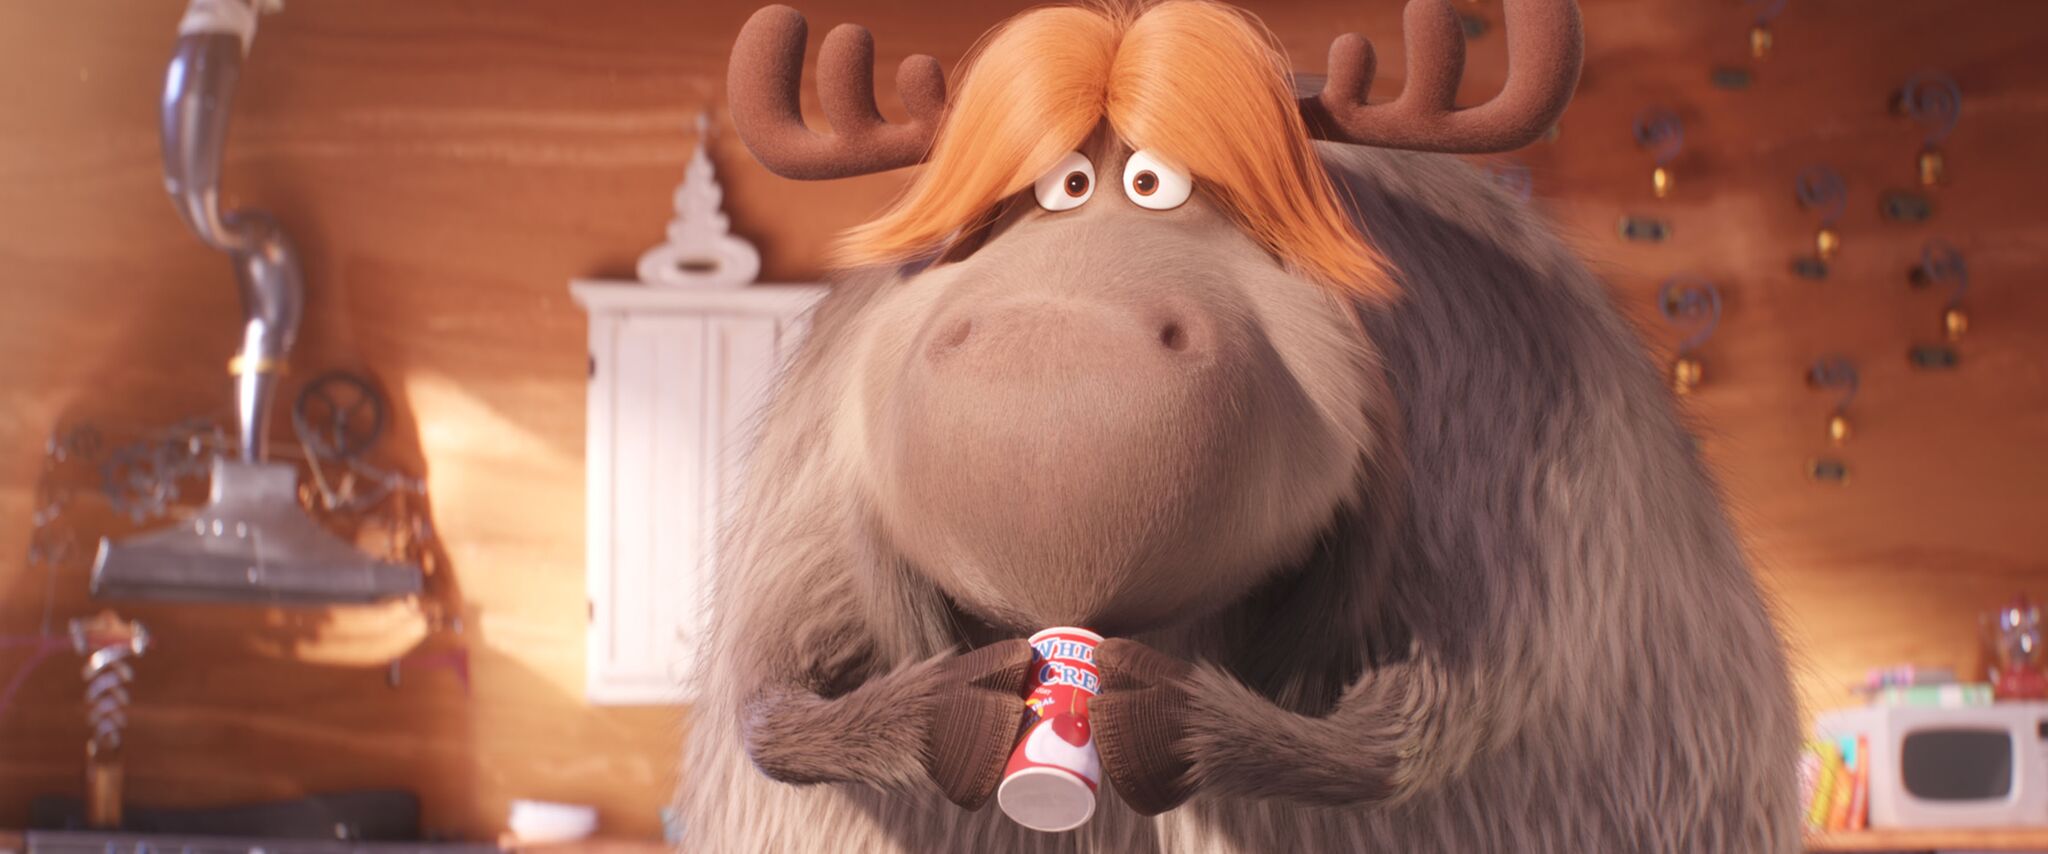 The Grinch' starring Benedict Cumberbatch: New Trailer, Poster and